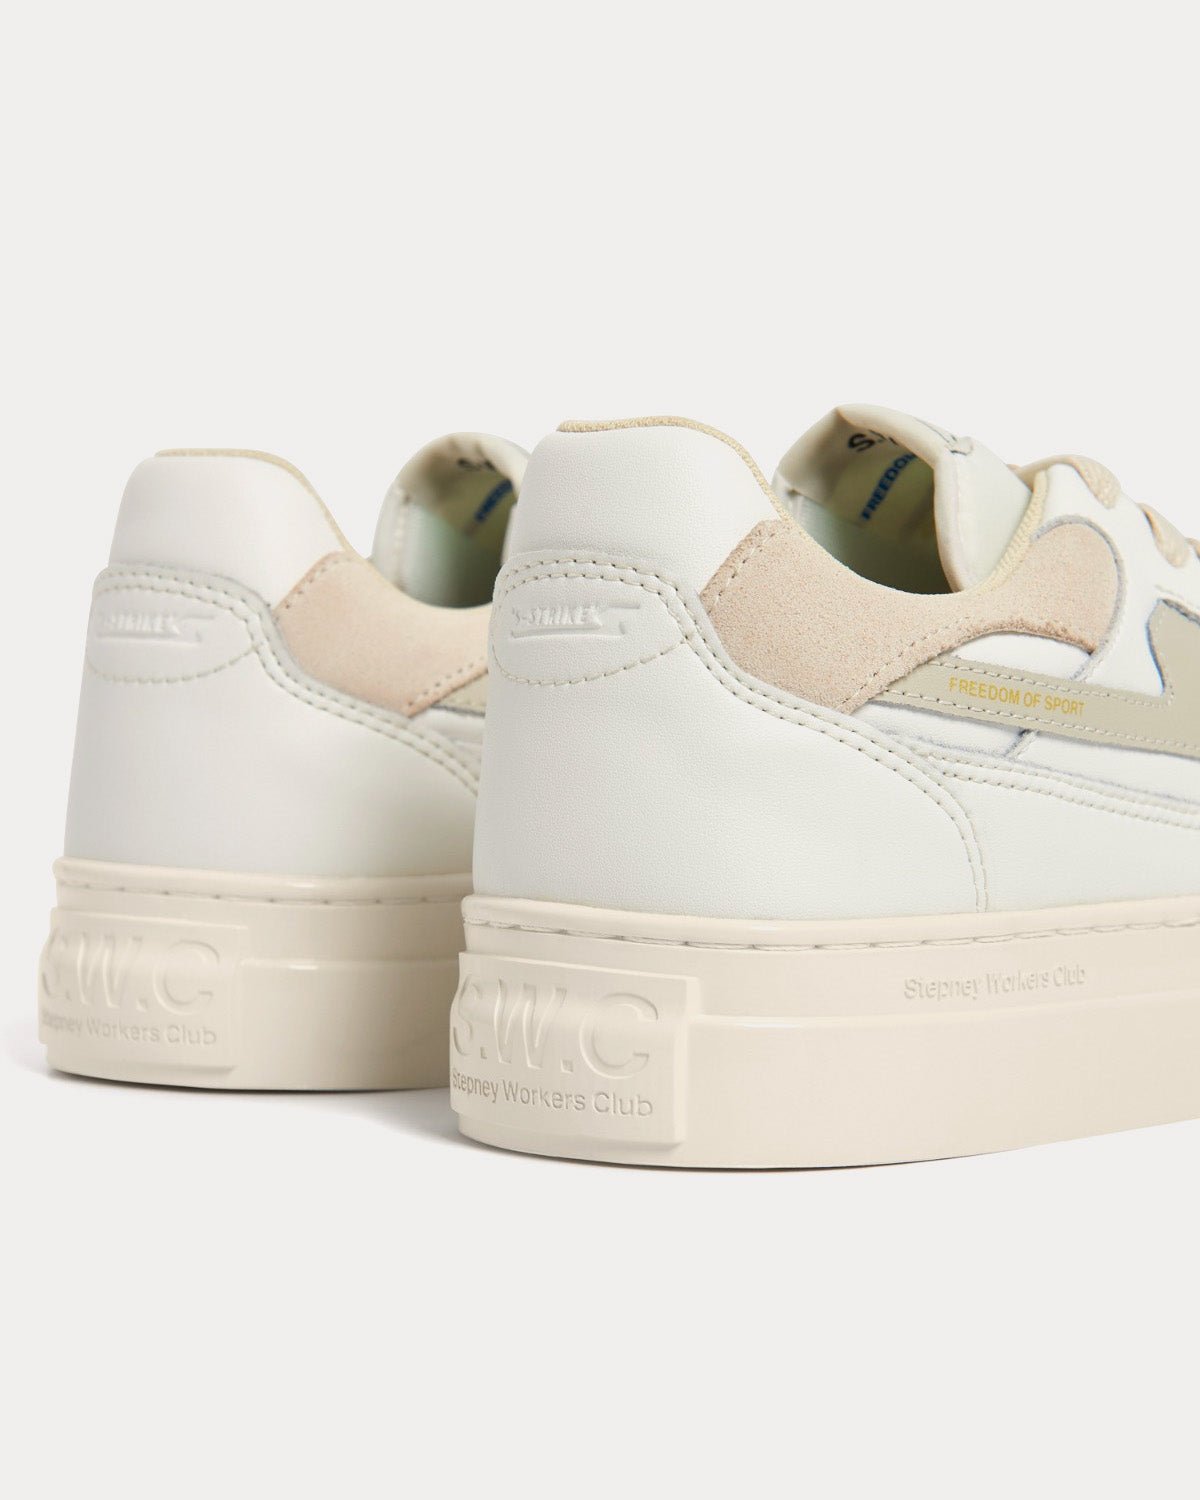 Stepney Workers Club - Pearl S-Strike Leather White / Putty Low Top Sneakers